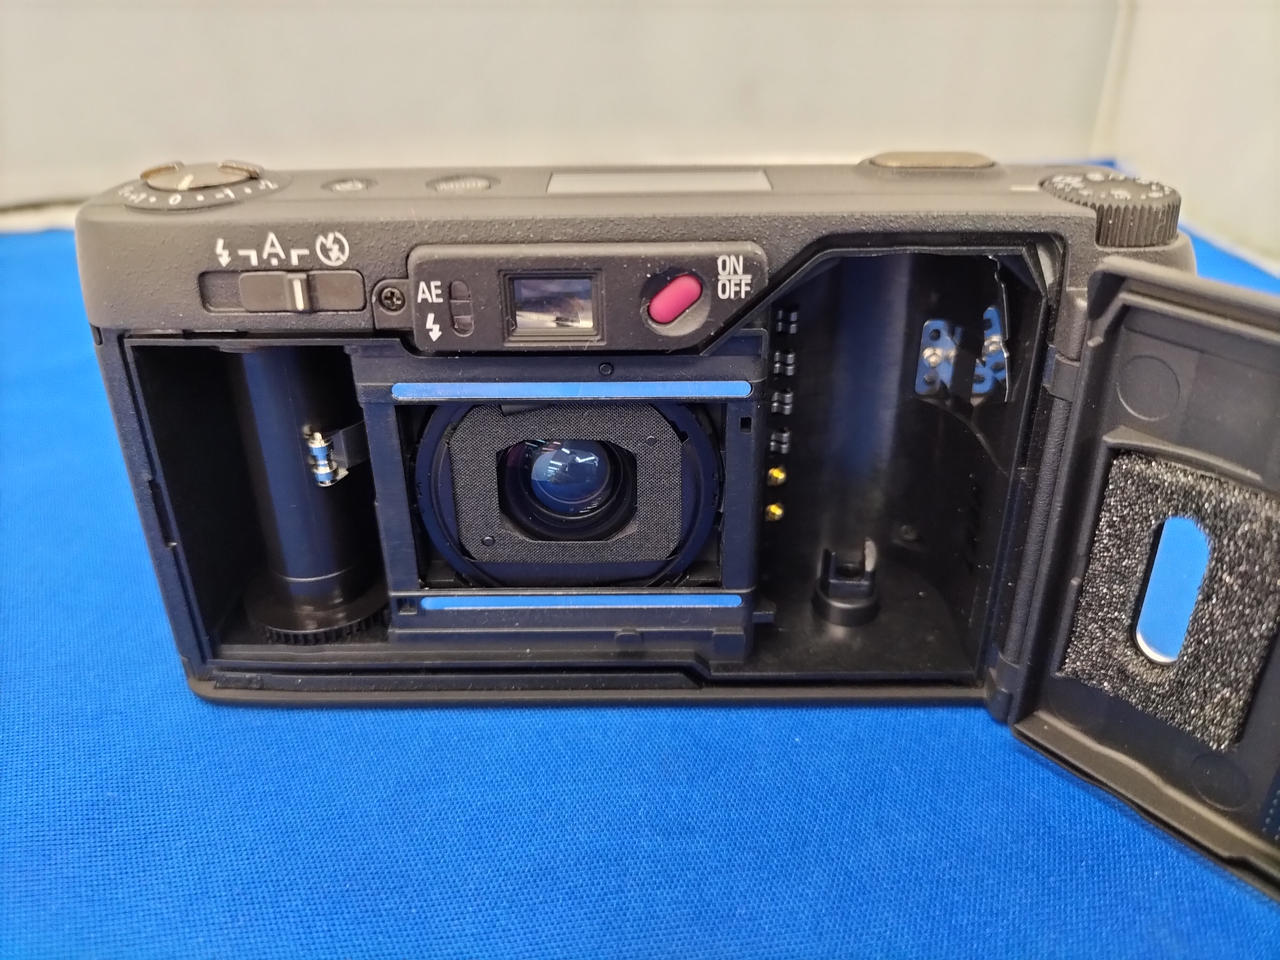 RICOH Compact Film Camera GR1V Used in Japan